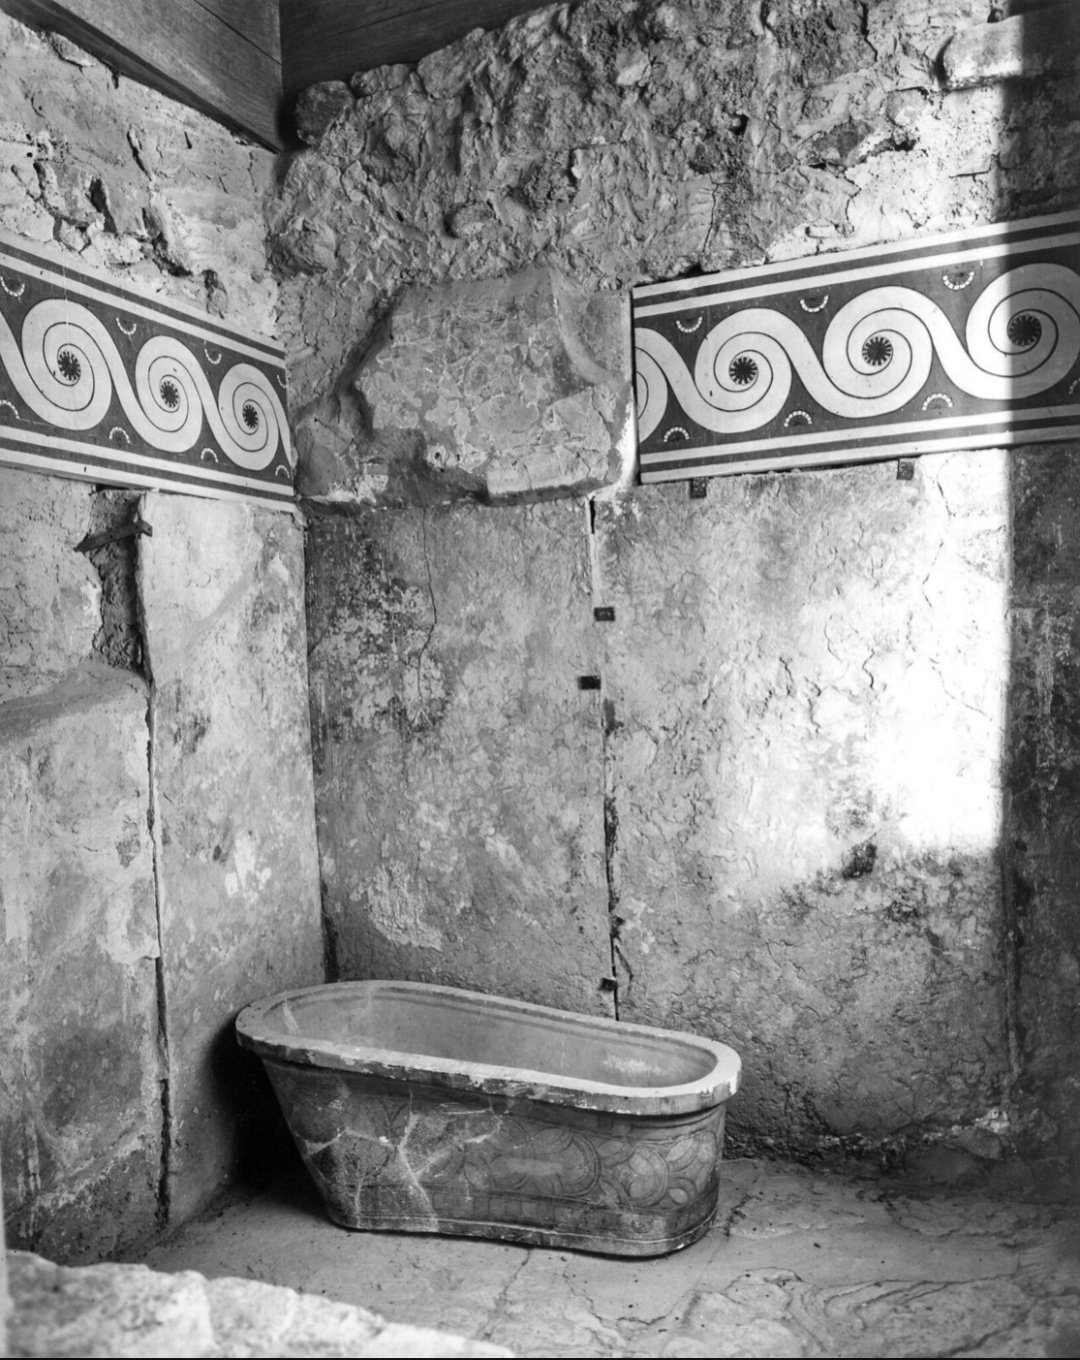 The Minoan 'Queen's bath' in the Palace of Knossos on Crete, built around 1500 B.C..jpg